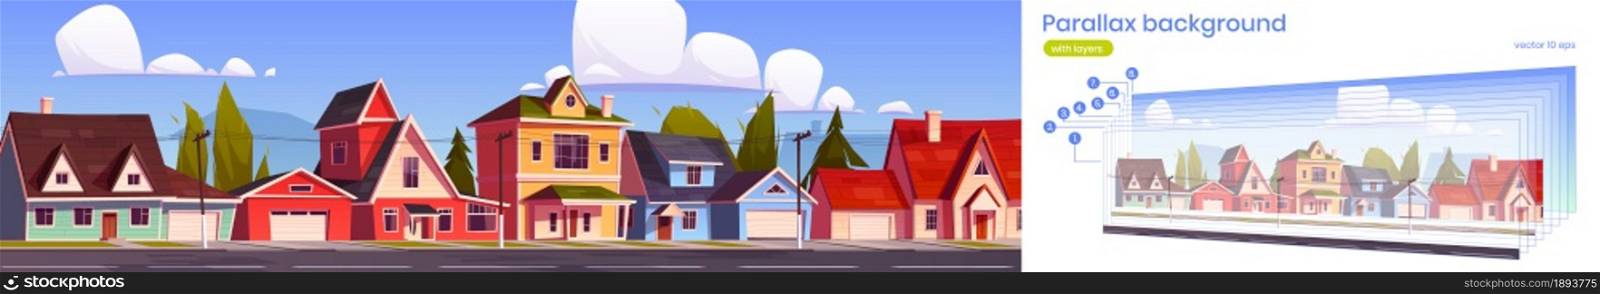 Parallax background for game suburb houses, suburban street with residential cottages 2d cityscape. Cartoon countryside buildings scene with separated layers, graphic animation Vector illustration. Parallax background for game suburb houses scene